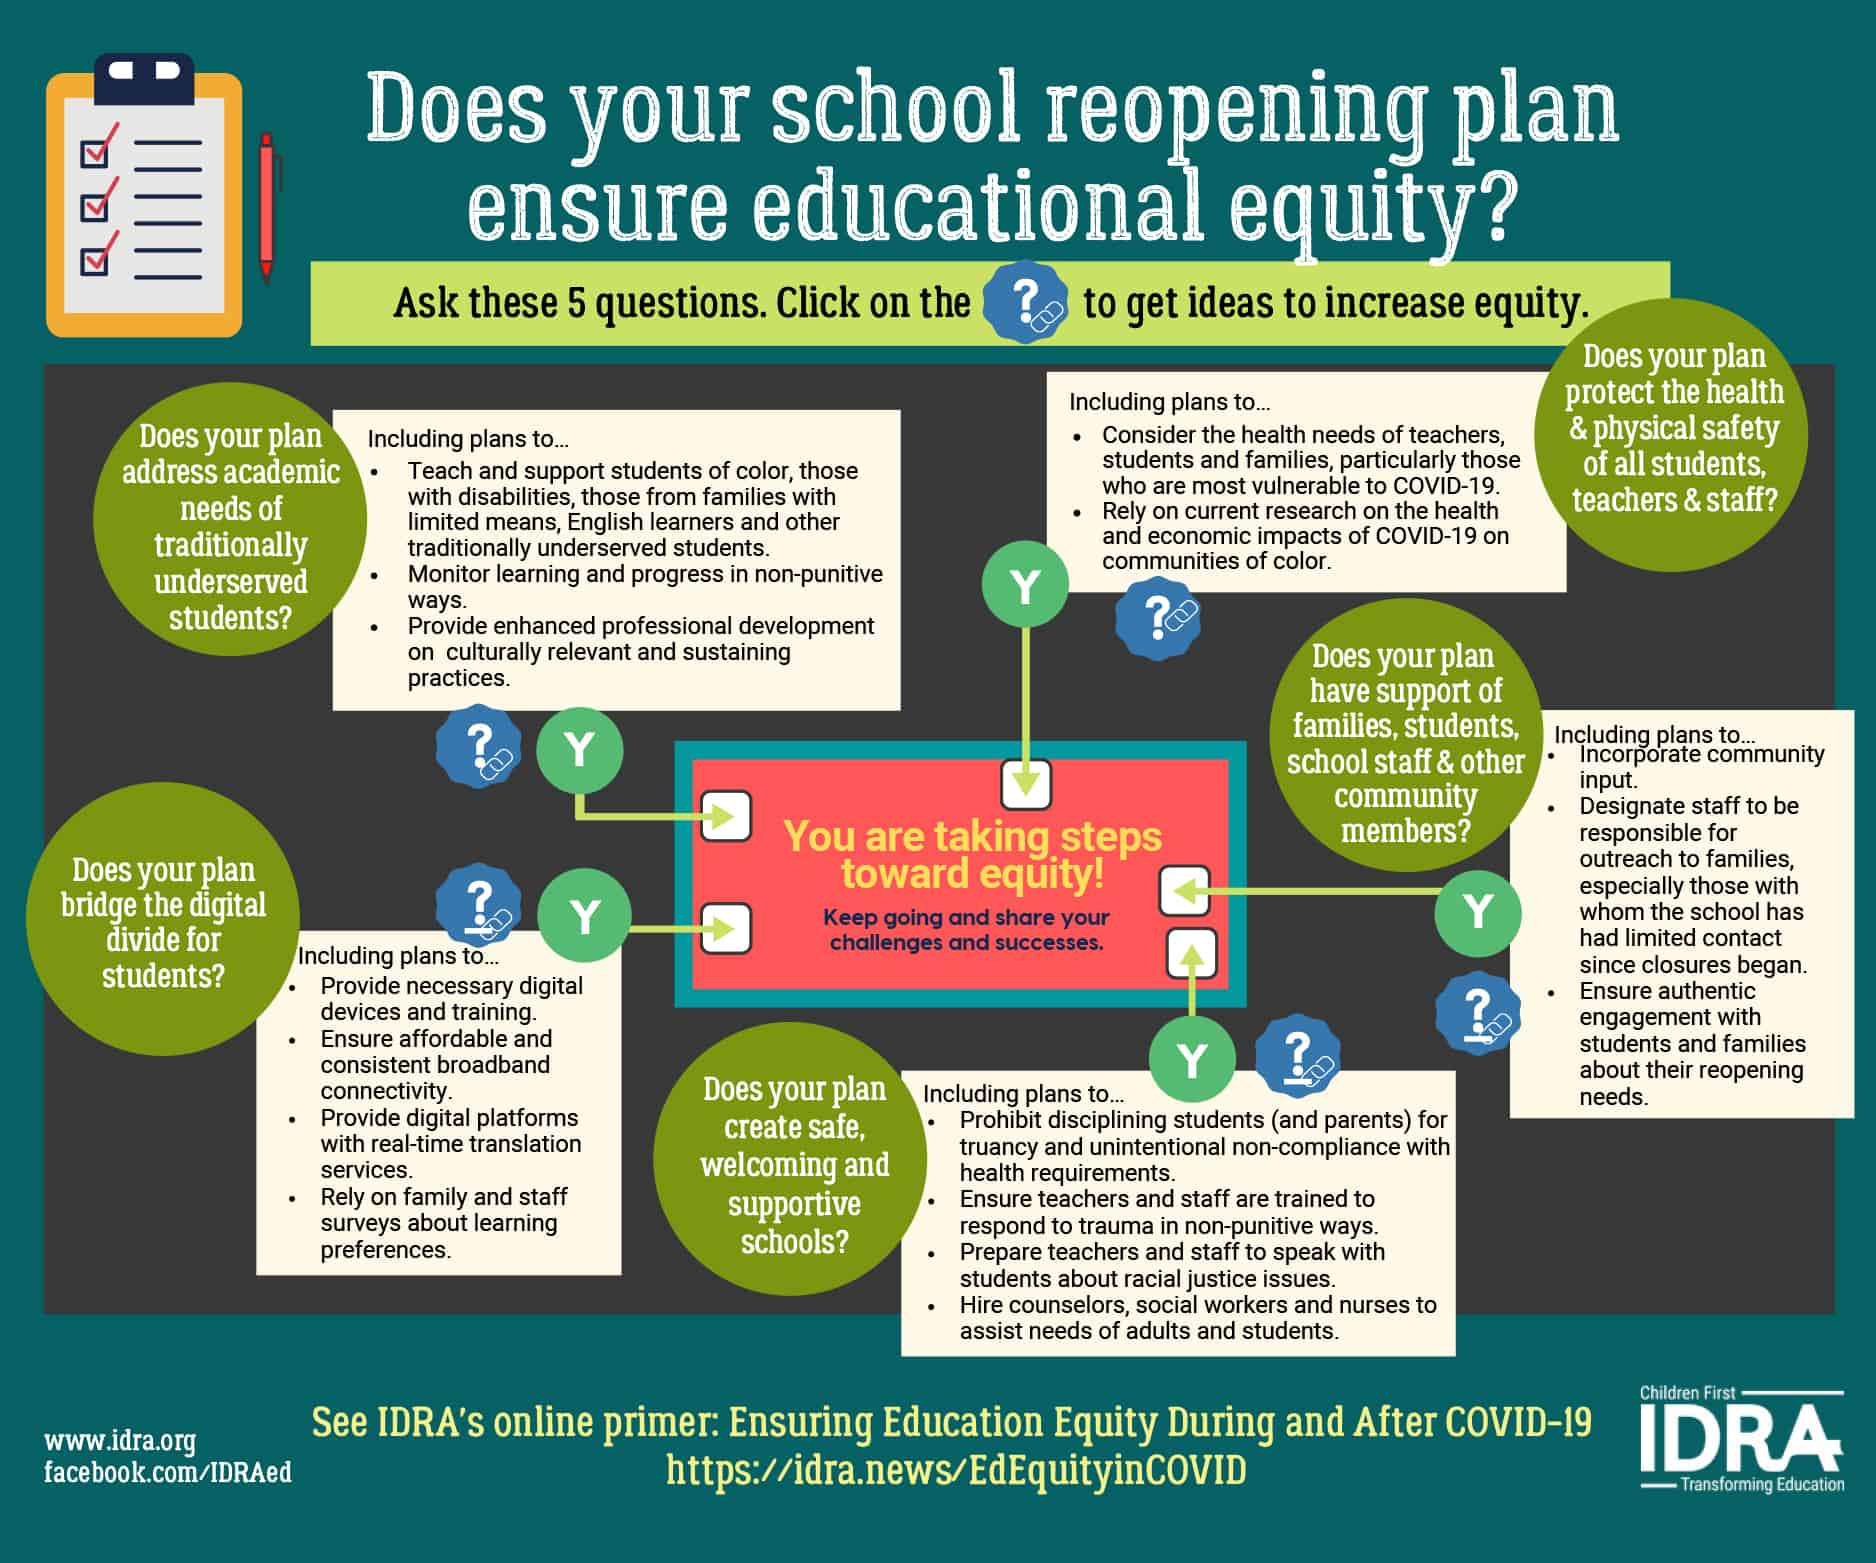 Tips to promote equity in school reopening